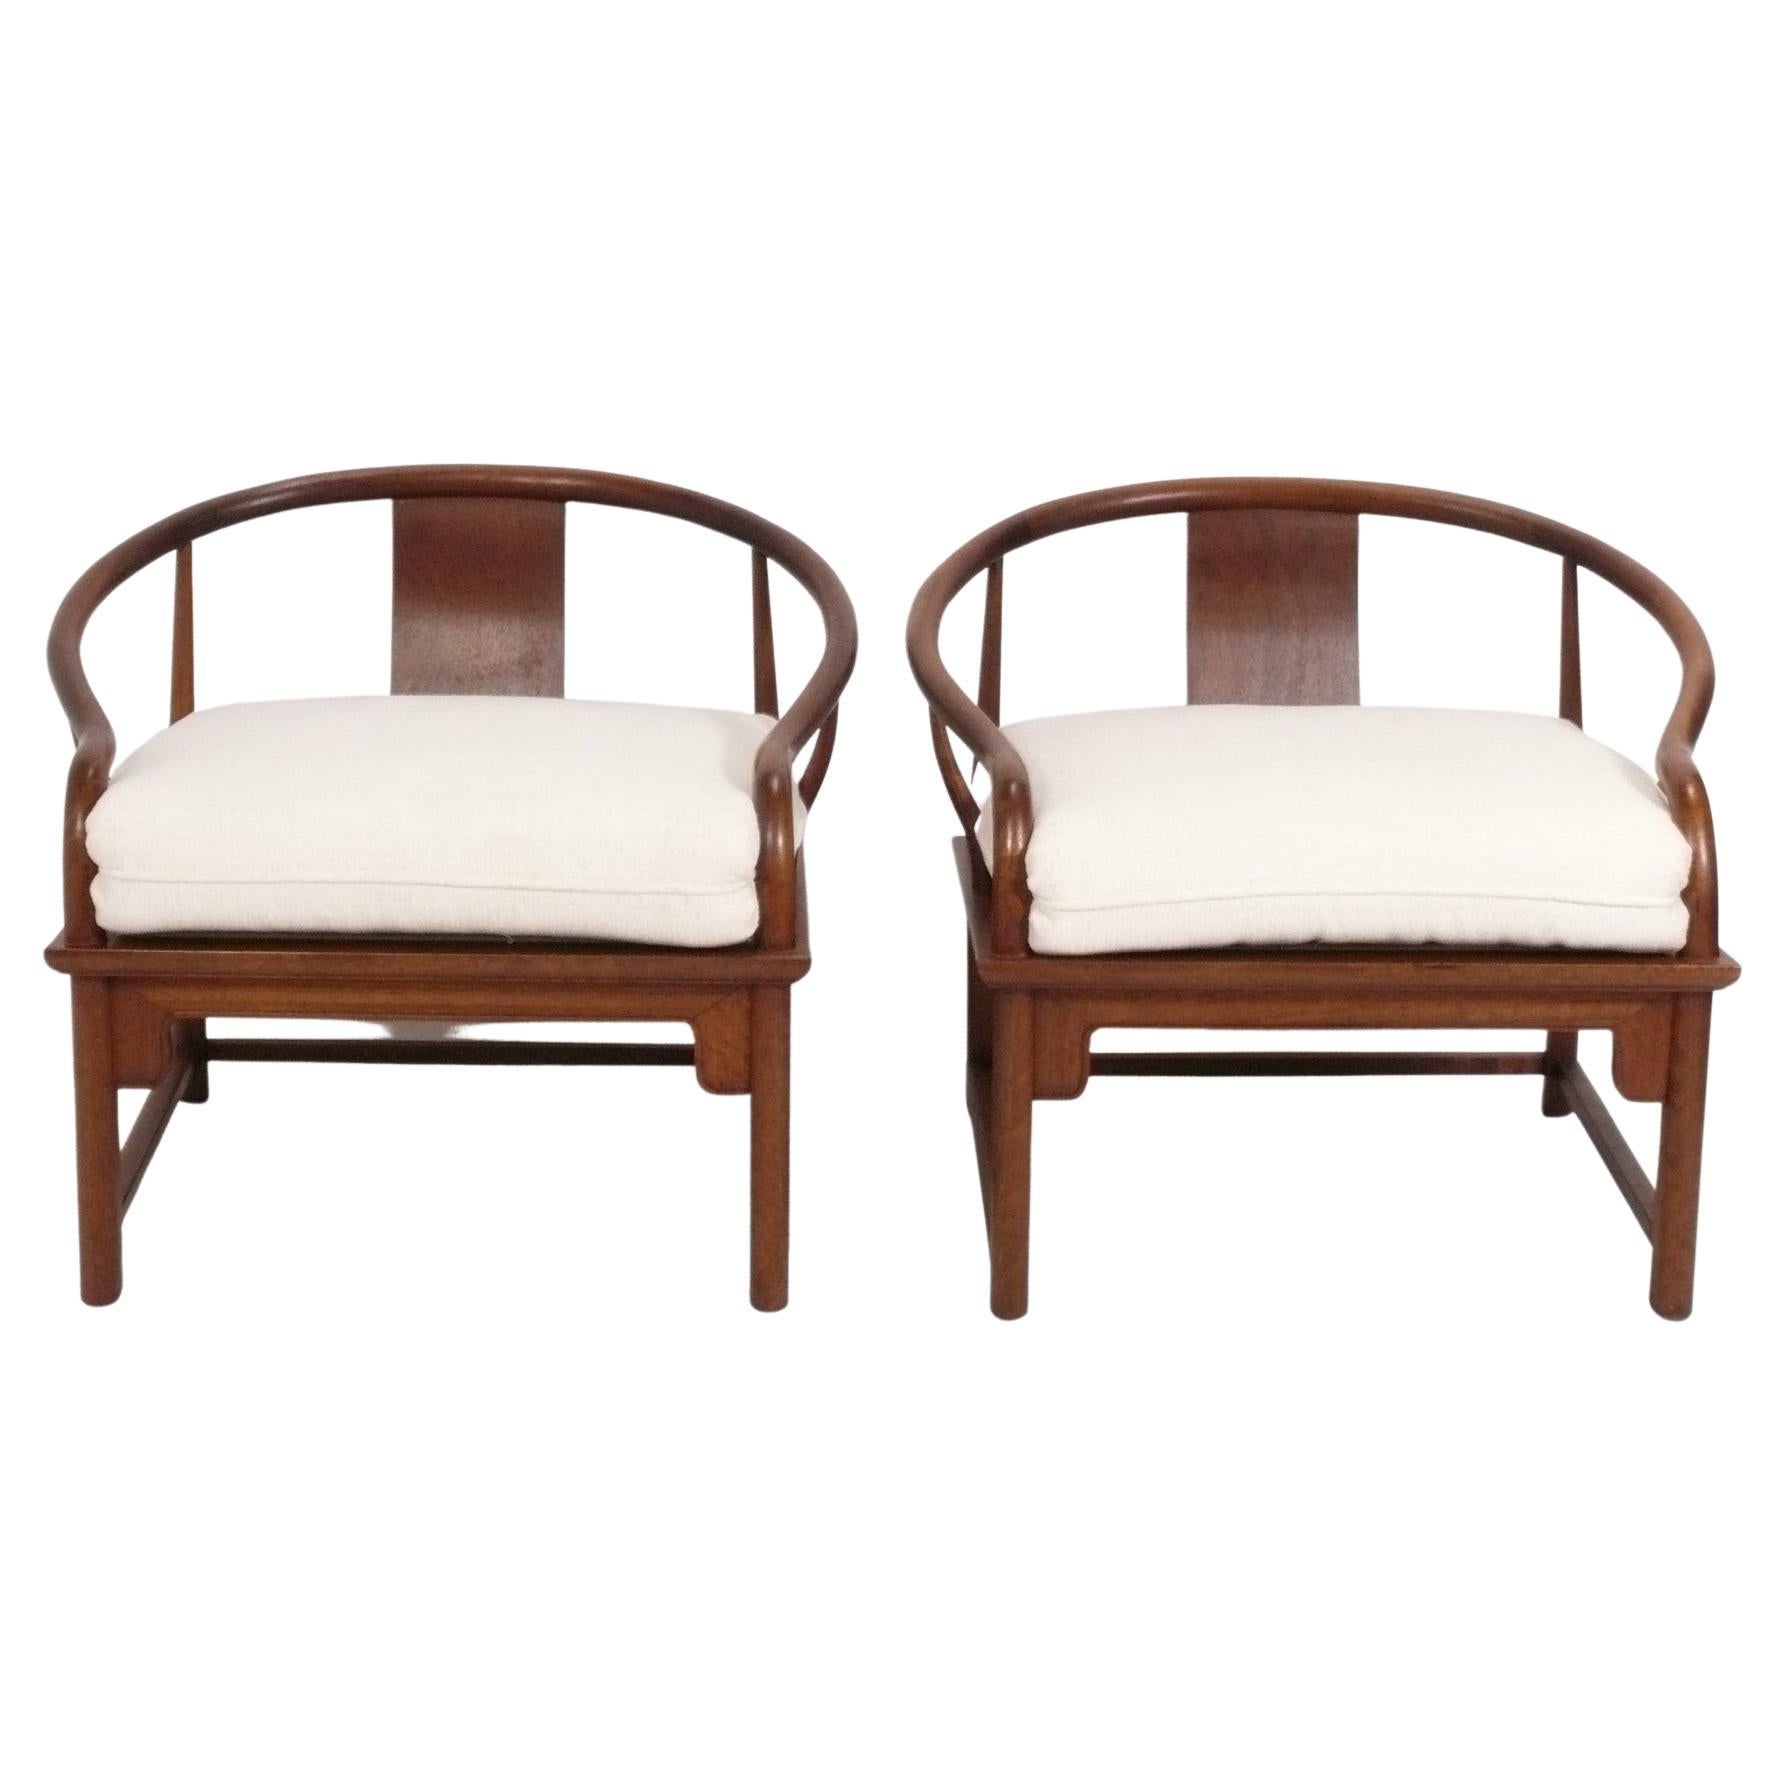 Pair of Asian Influenced Horseshoe Back Lounge Chairs by Michael Taylor Baker For Sale